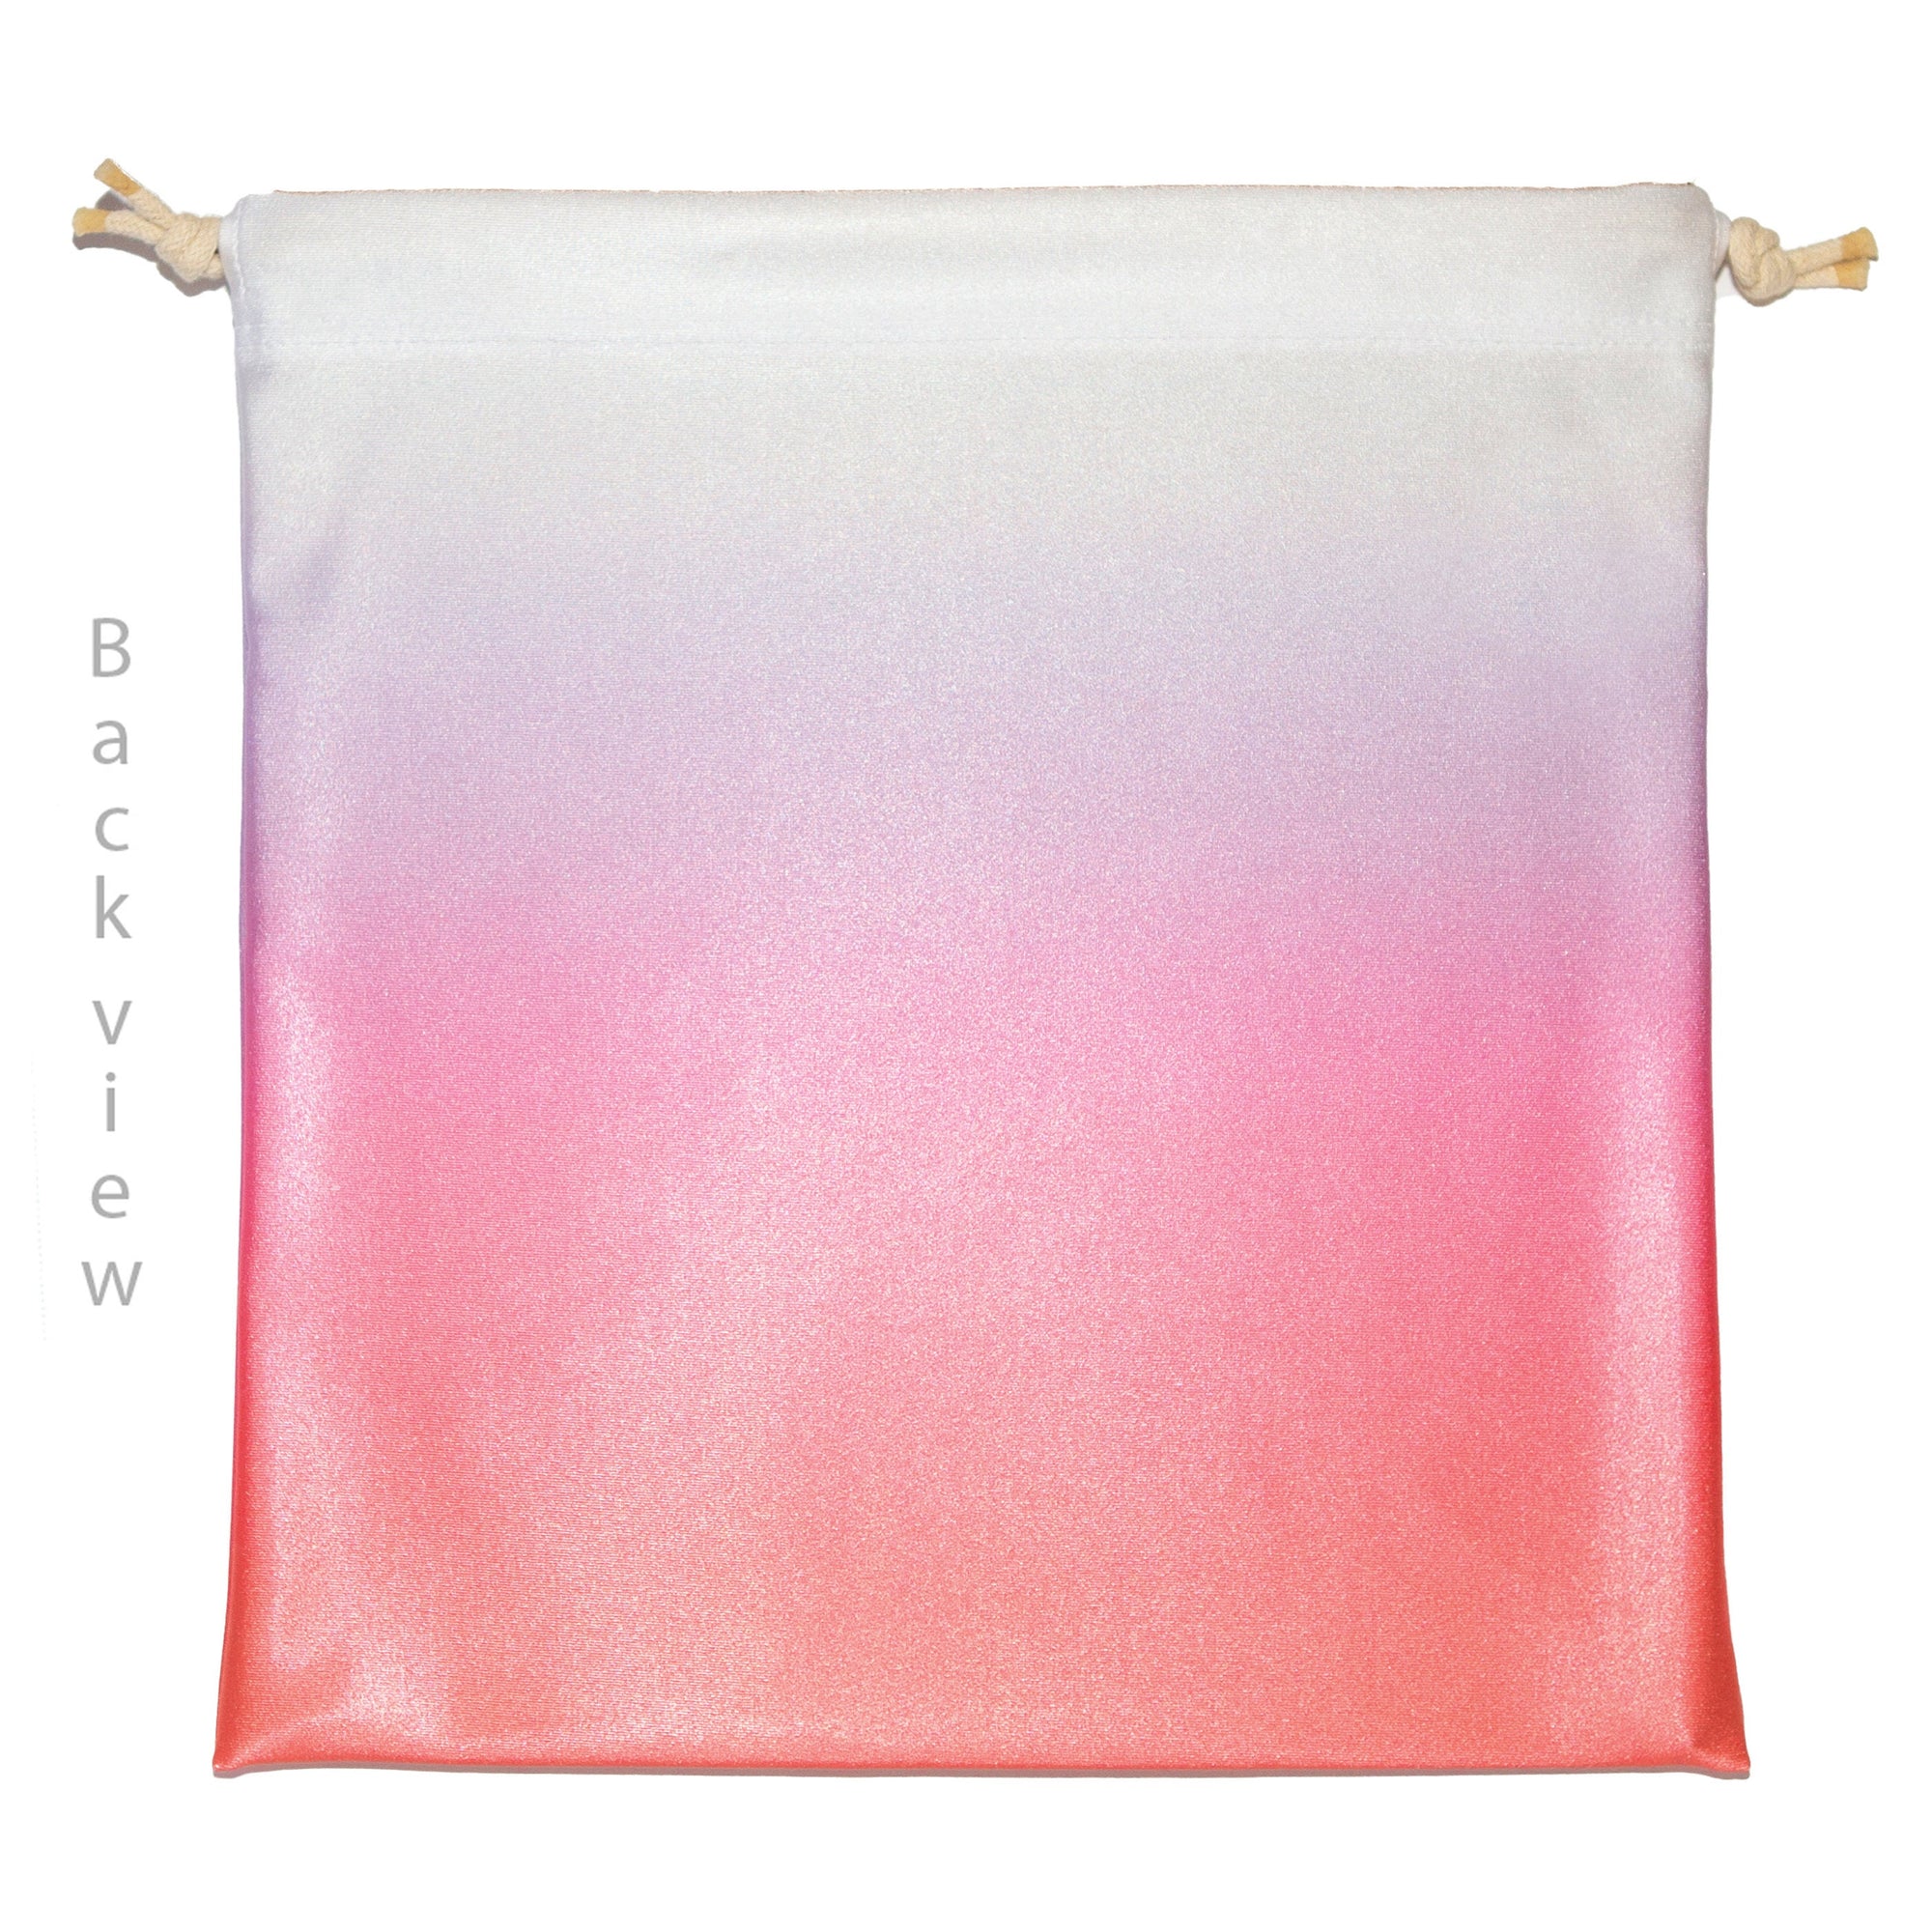 Personlized Gymnastics Grip Bag with Back Handspring in Coral, Purple, White Ombre